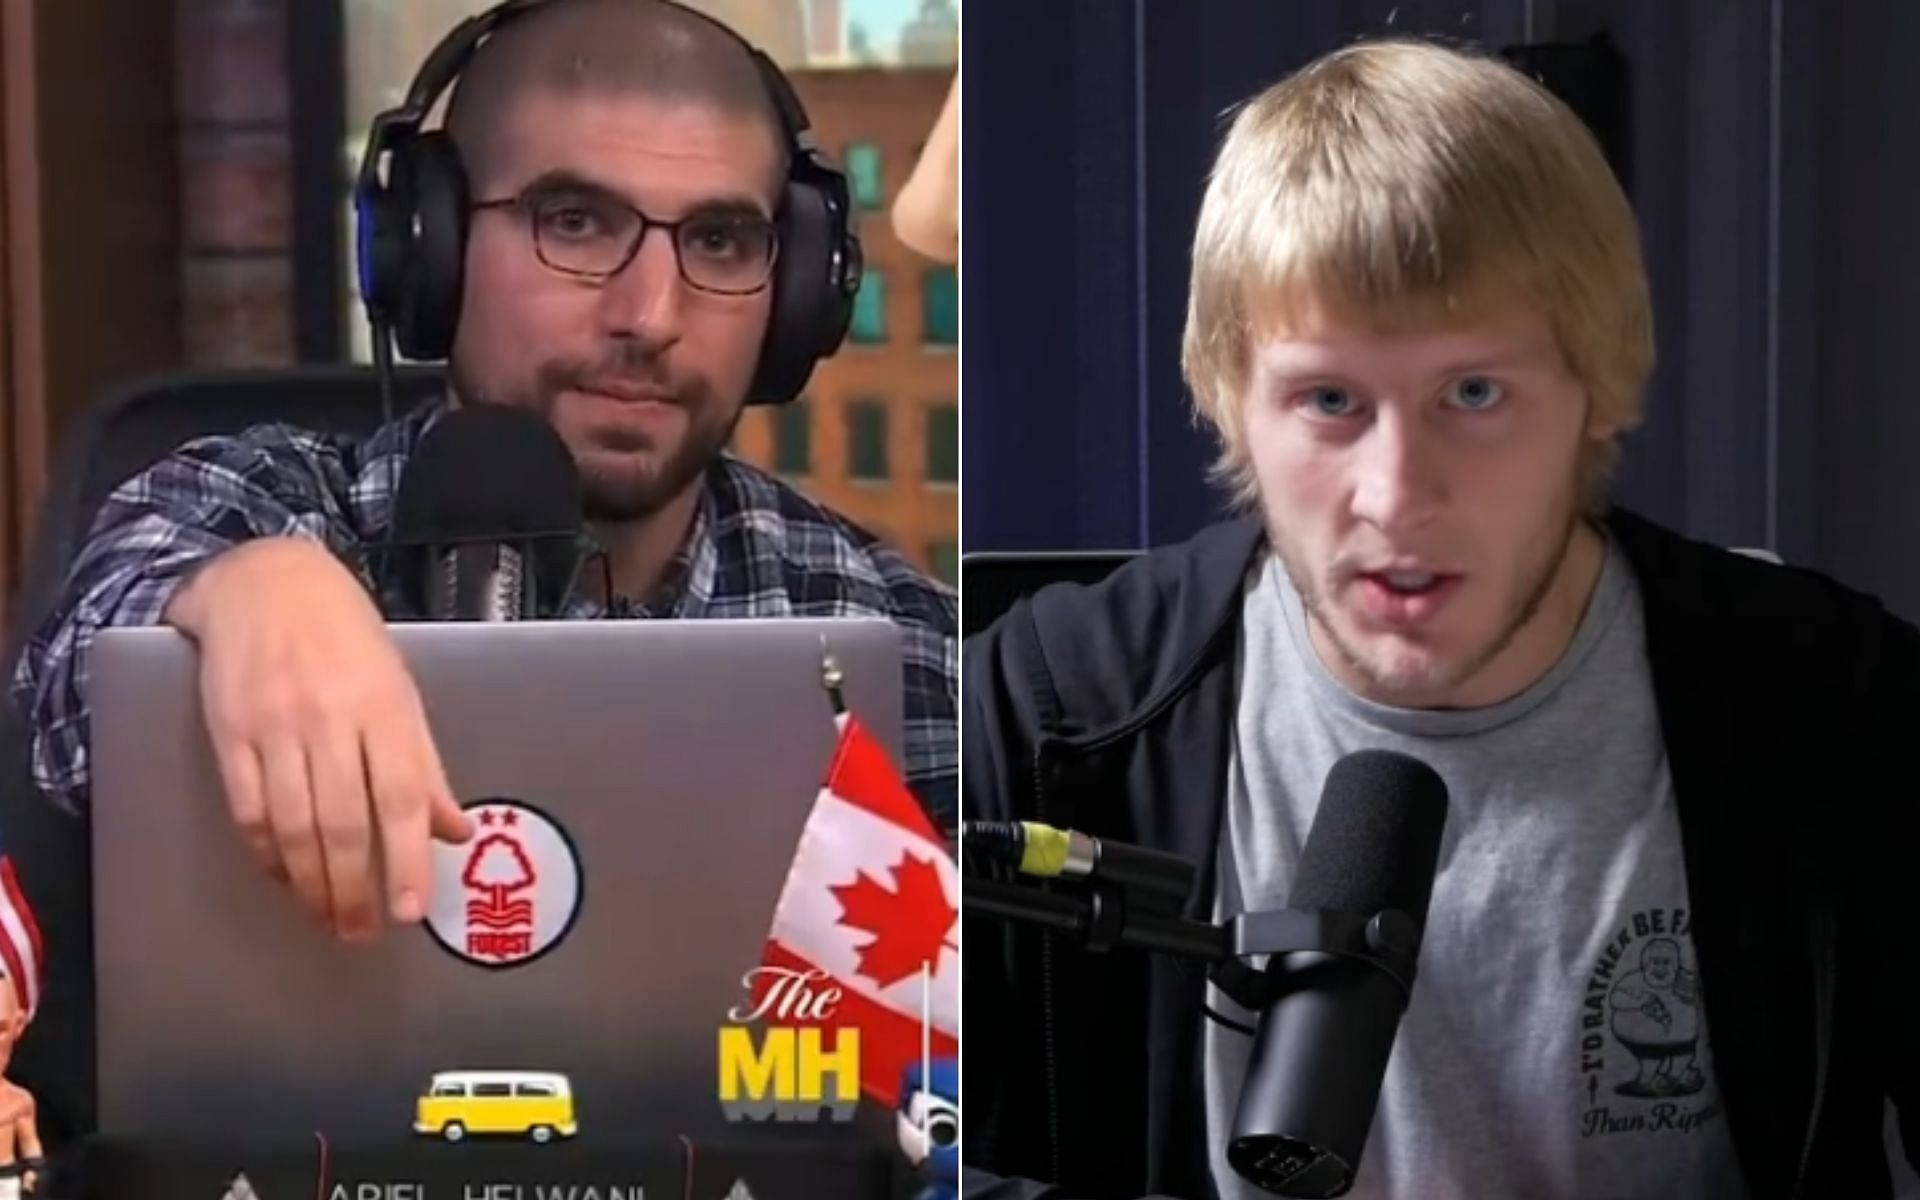 (L) Ariel Helwani, and Paddy Pimblett (R) {Photo credit: Paddy The Baddy - YouTube, and @oocmma - Twitter}